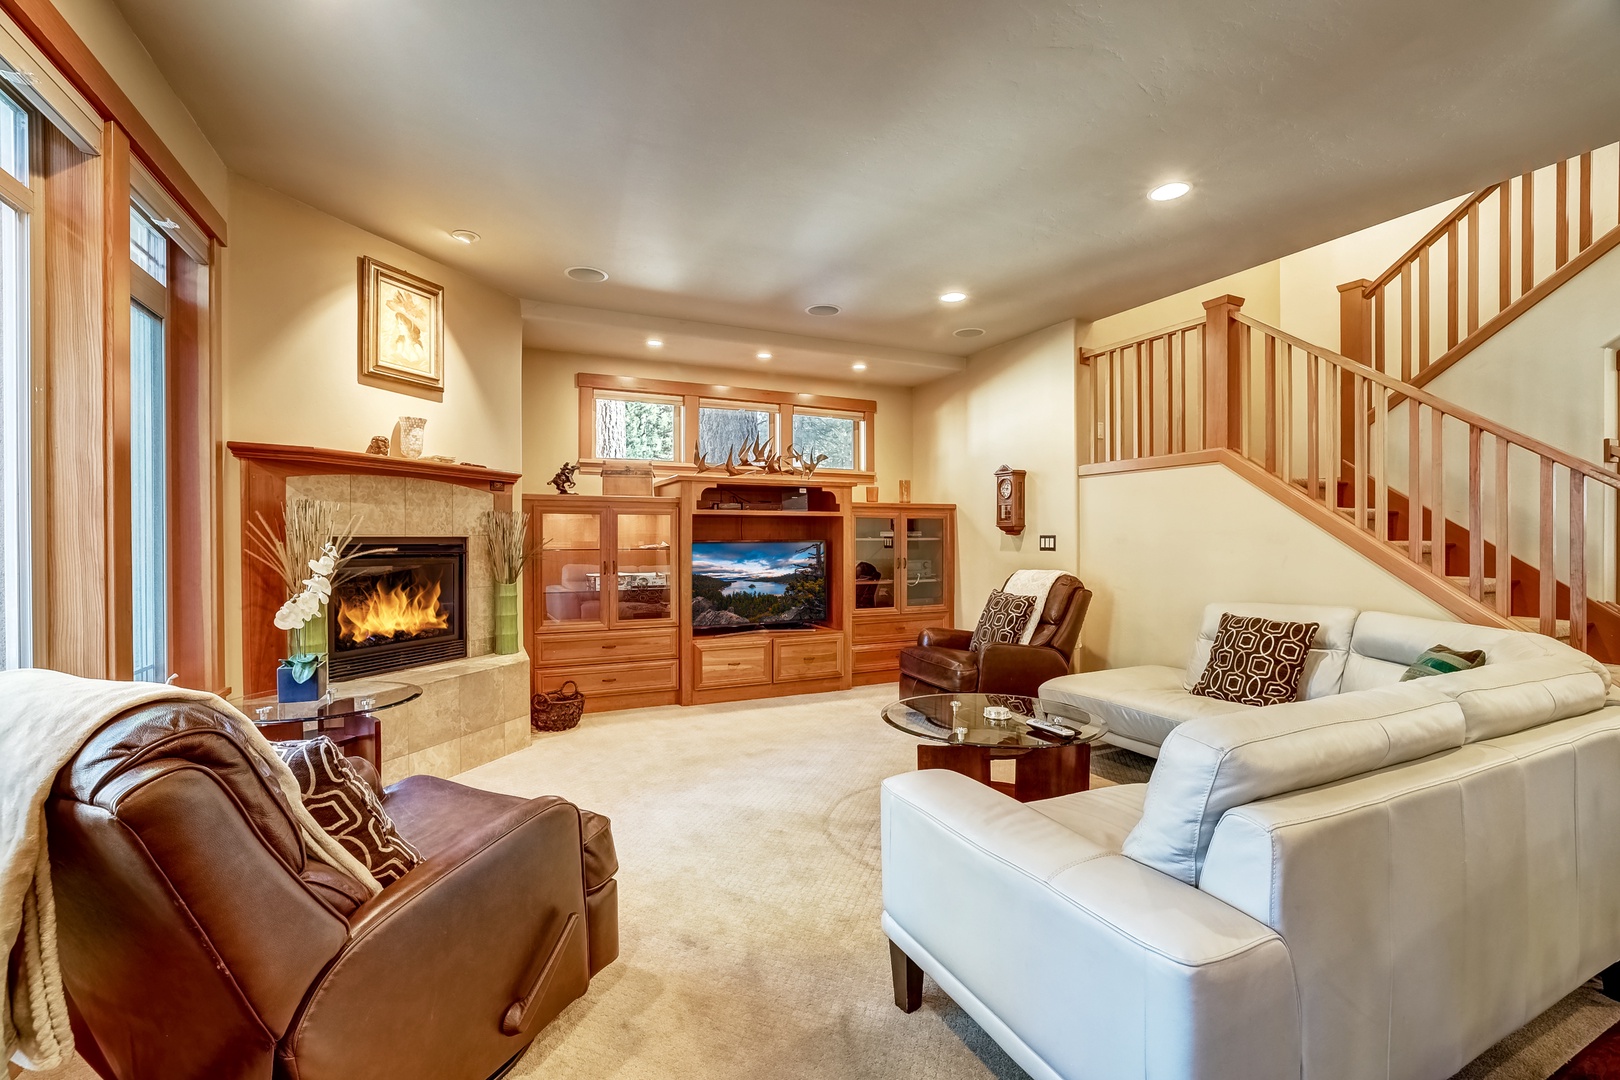 Open living space with gas fireplace, and TV